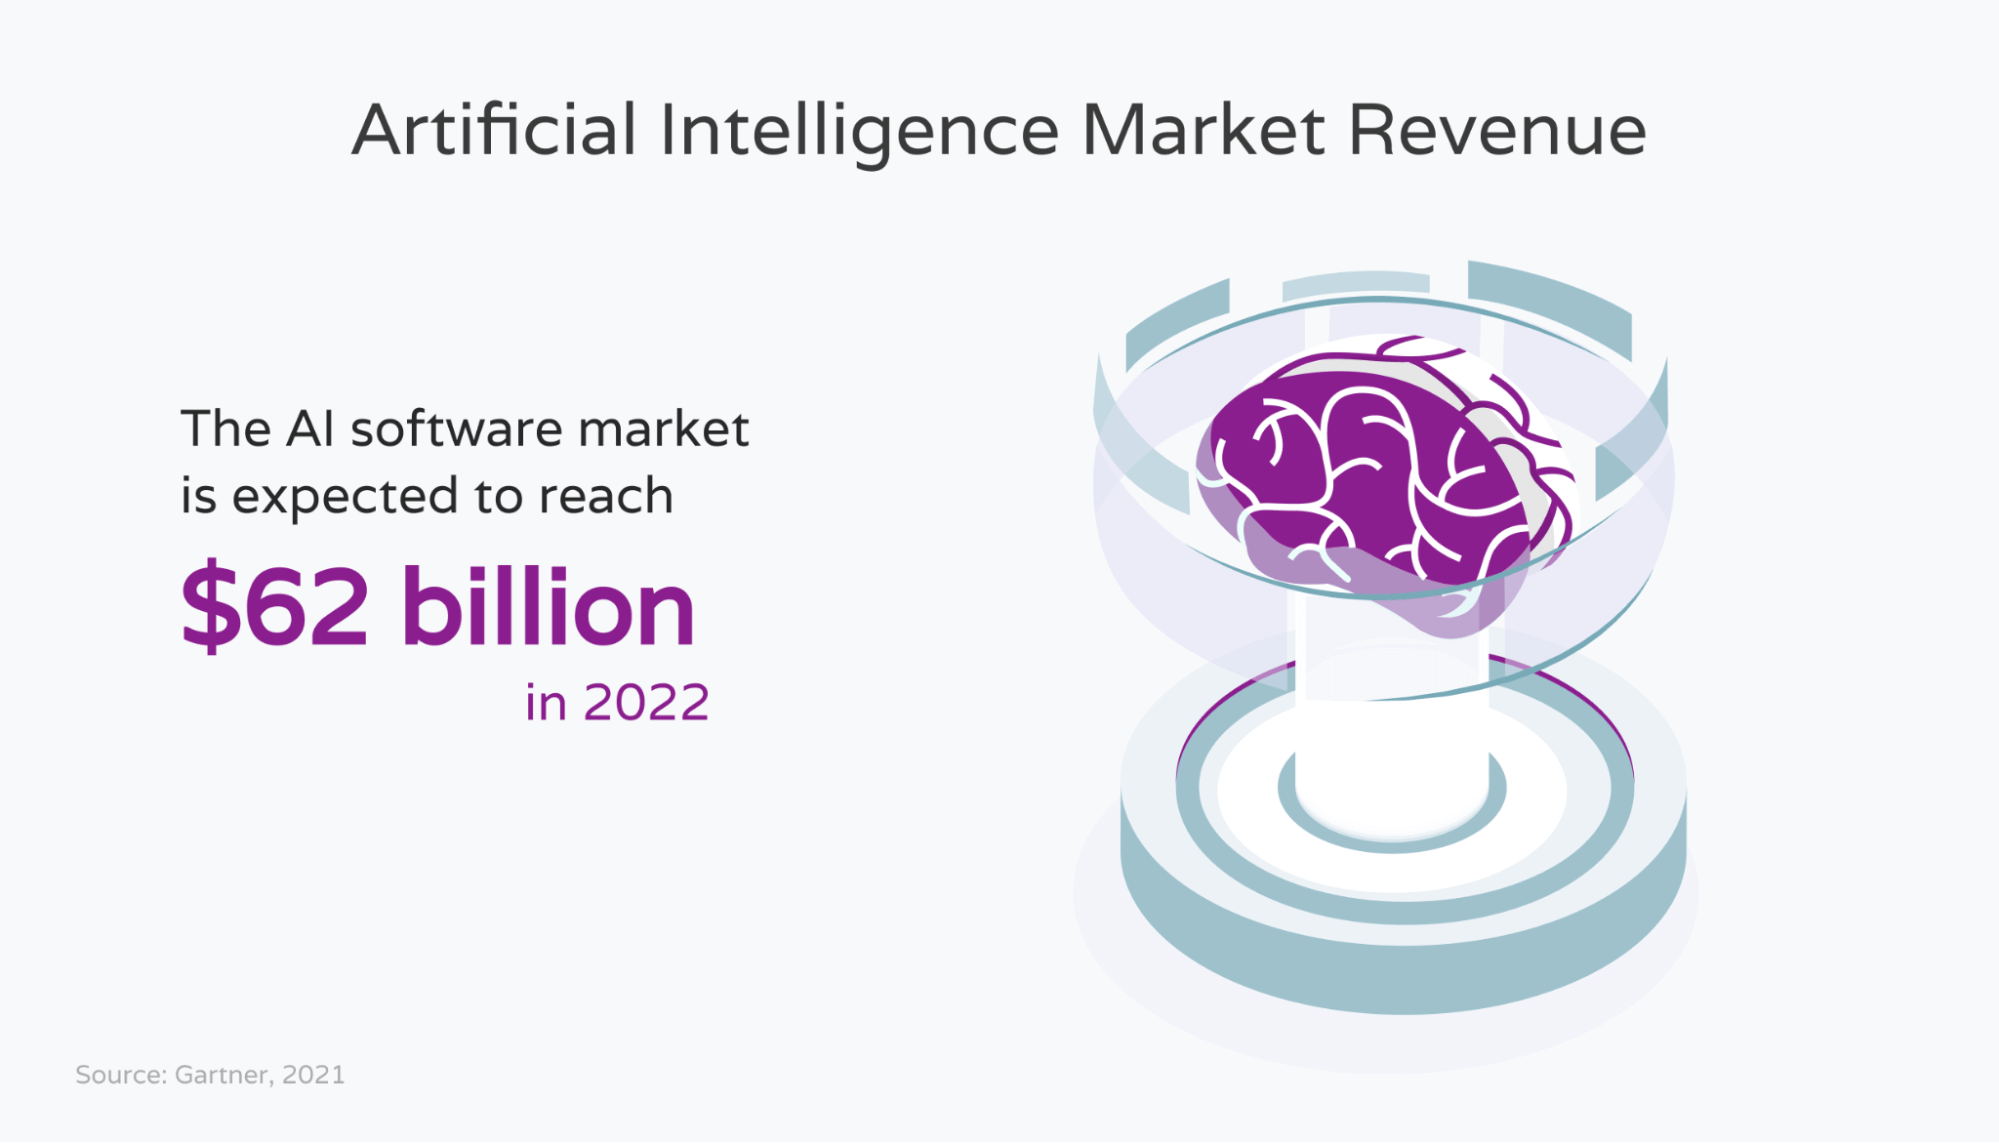 Image showing the expected market revenue of artificial intelligence in 2022